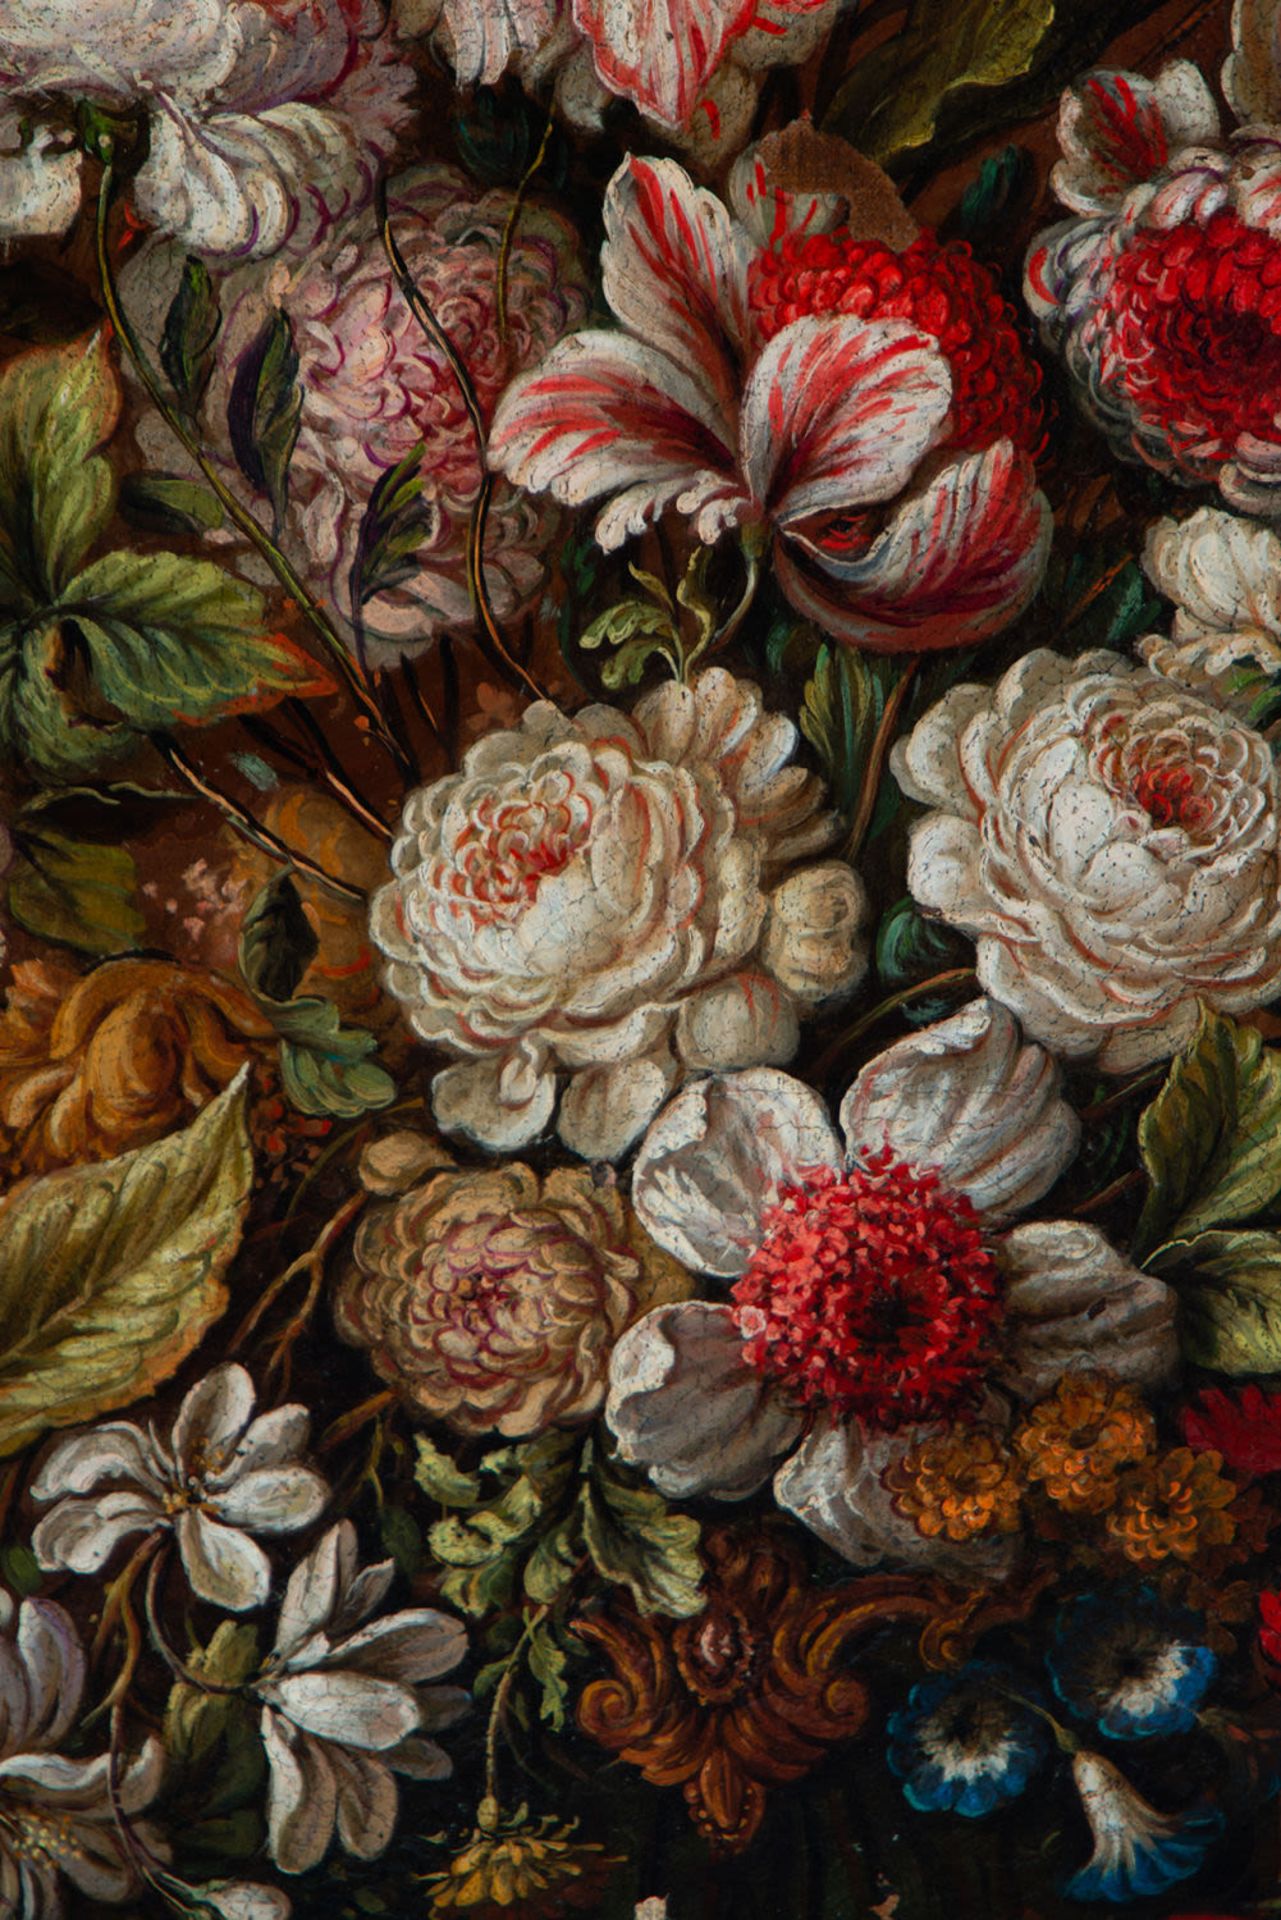 Pair of large still lifes of Flowers, Dutch school of the 17th - 18th century - Image 7 of 20